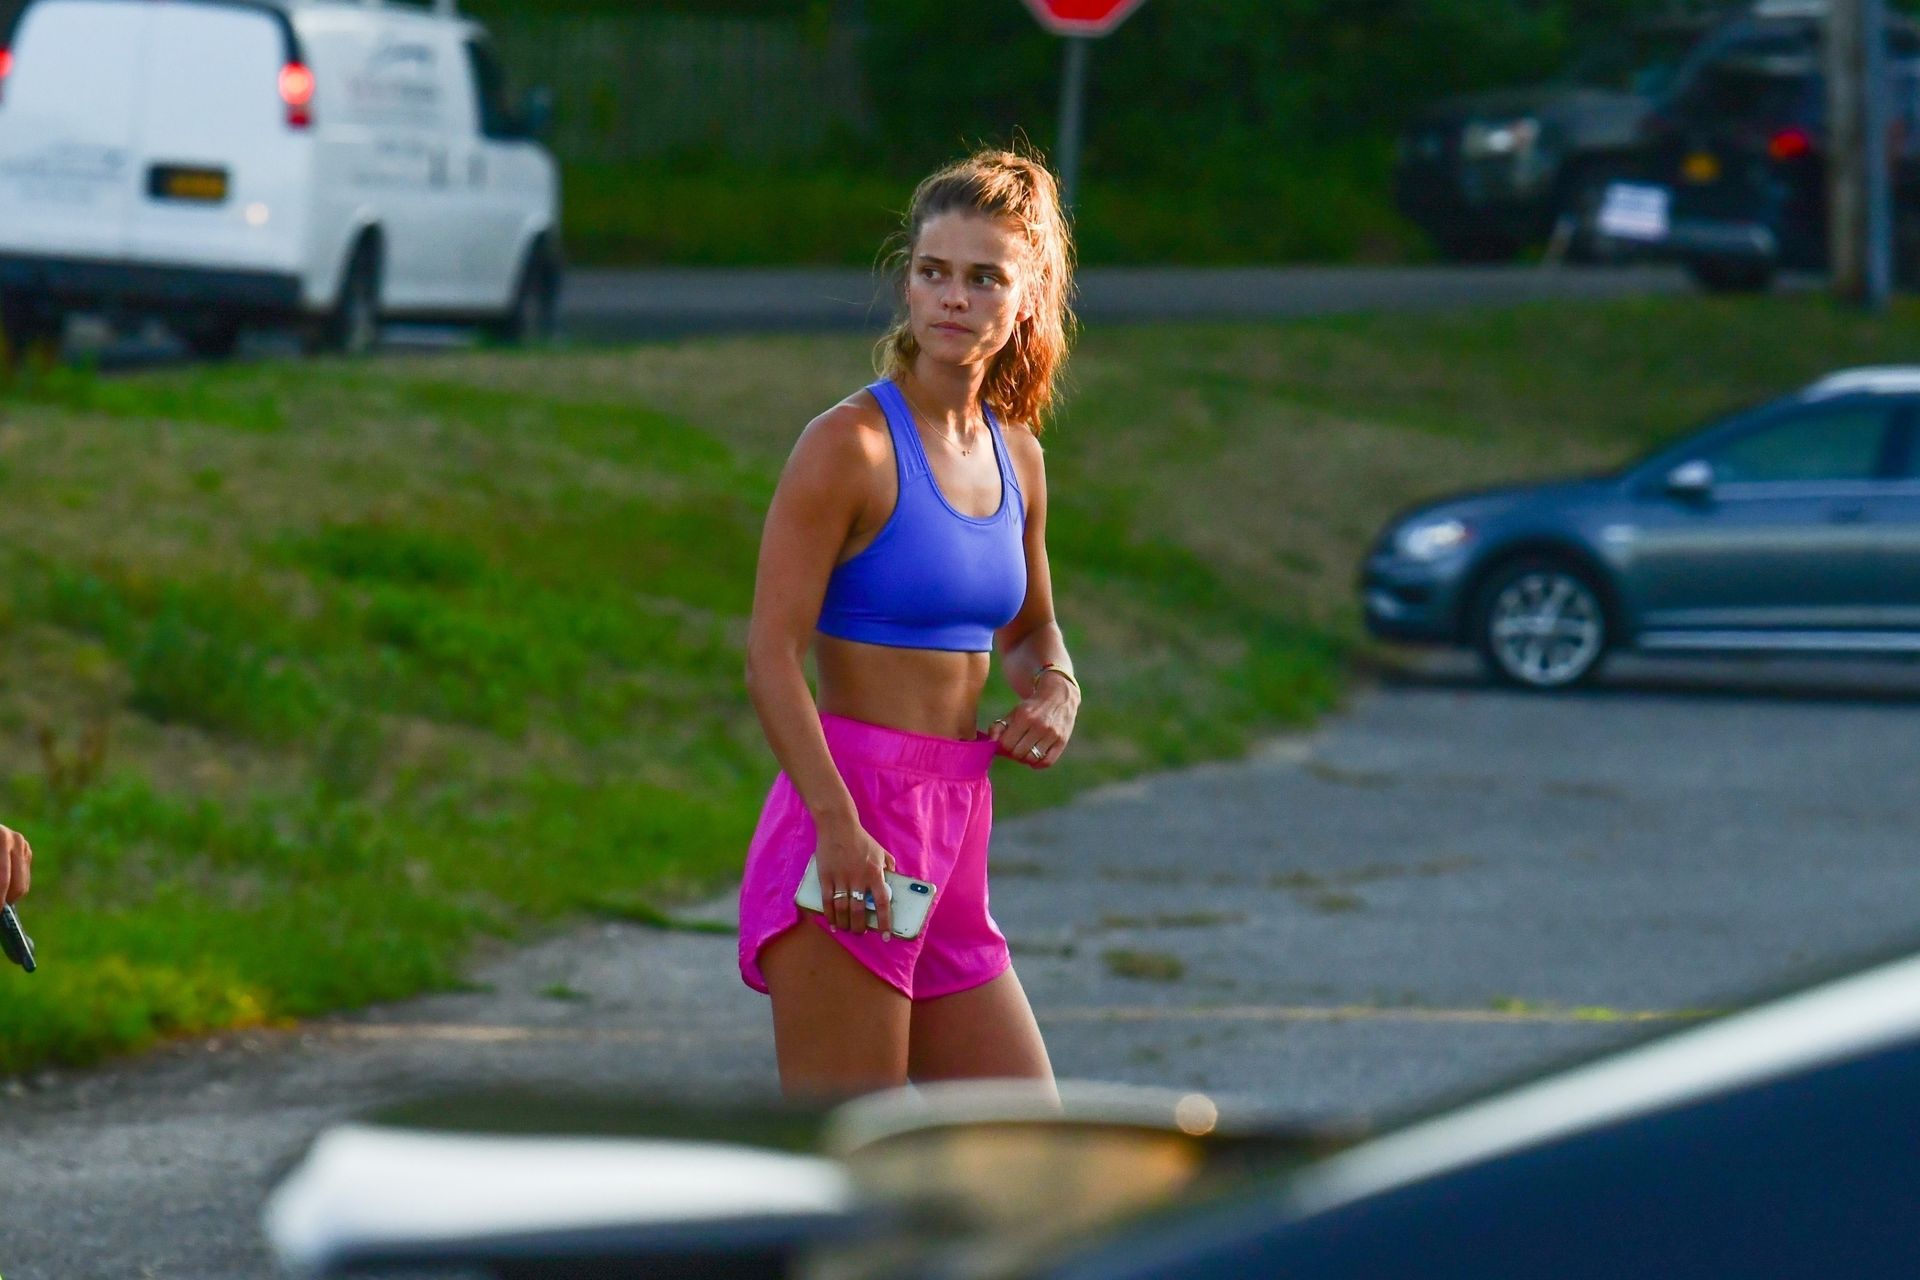 Nina Agdal & Jack Brinkley-Cook Chat After Their Work Out (Photos)